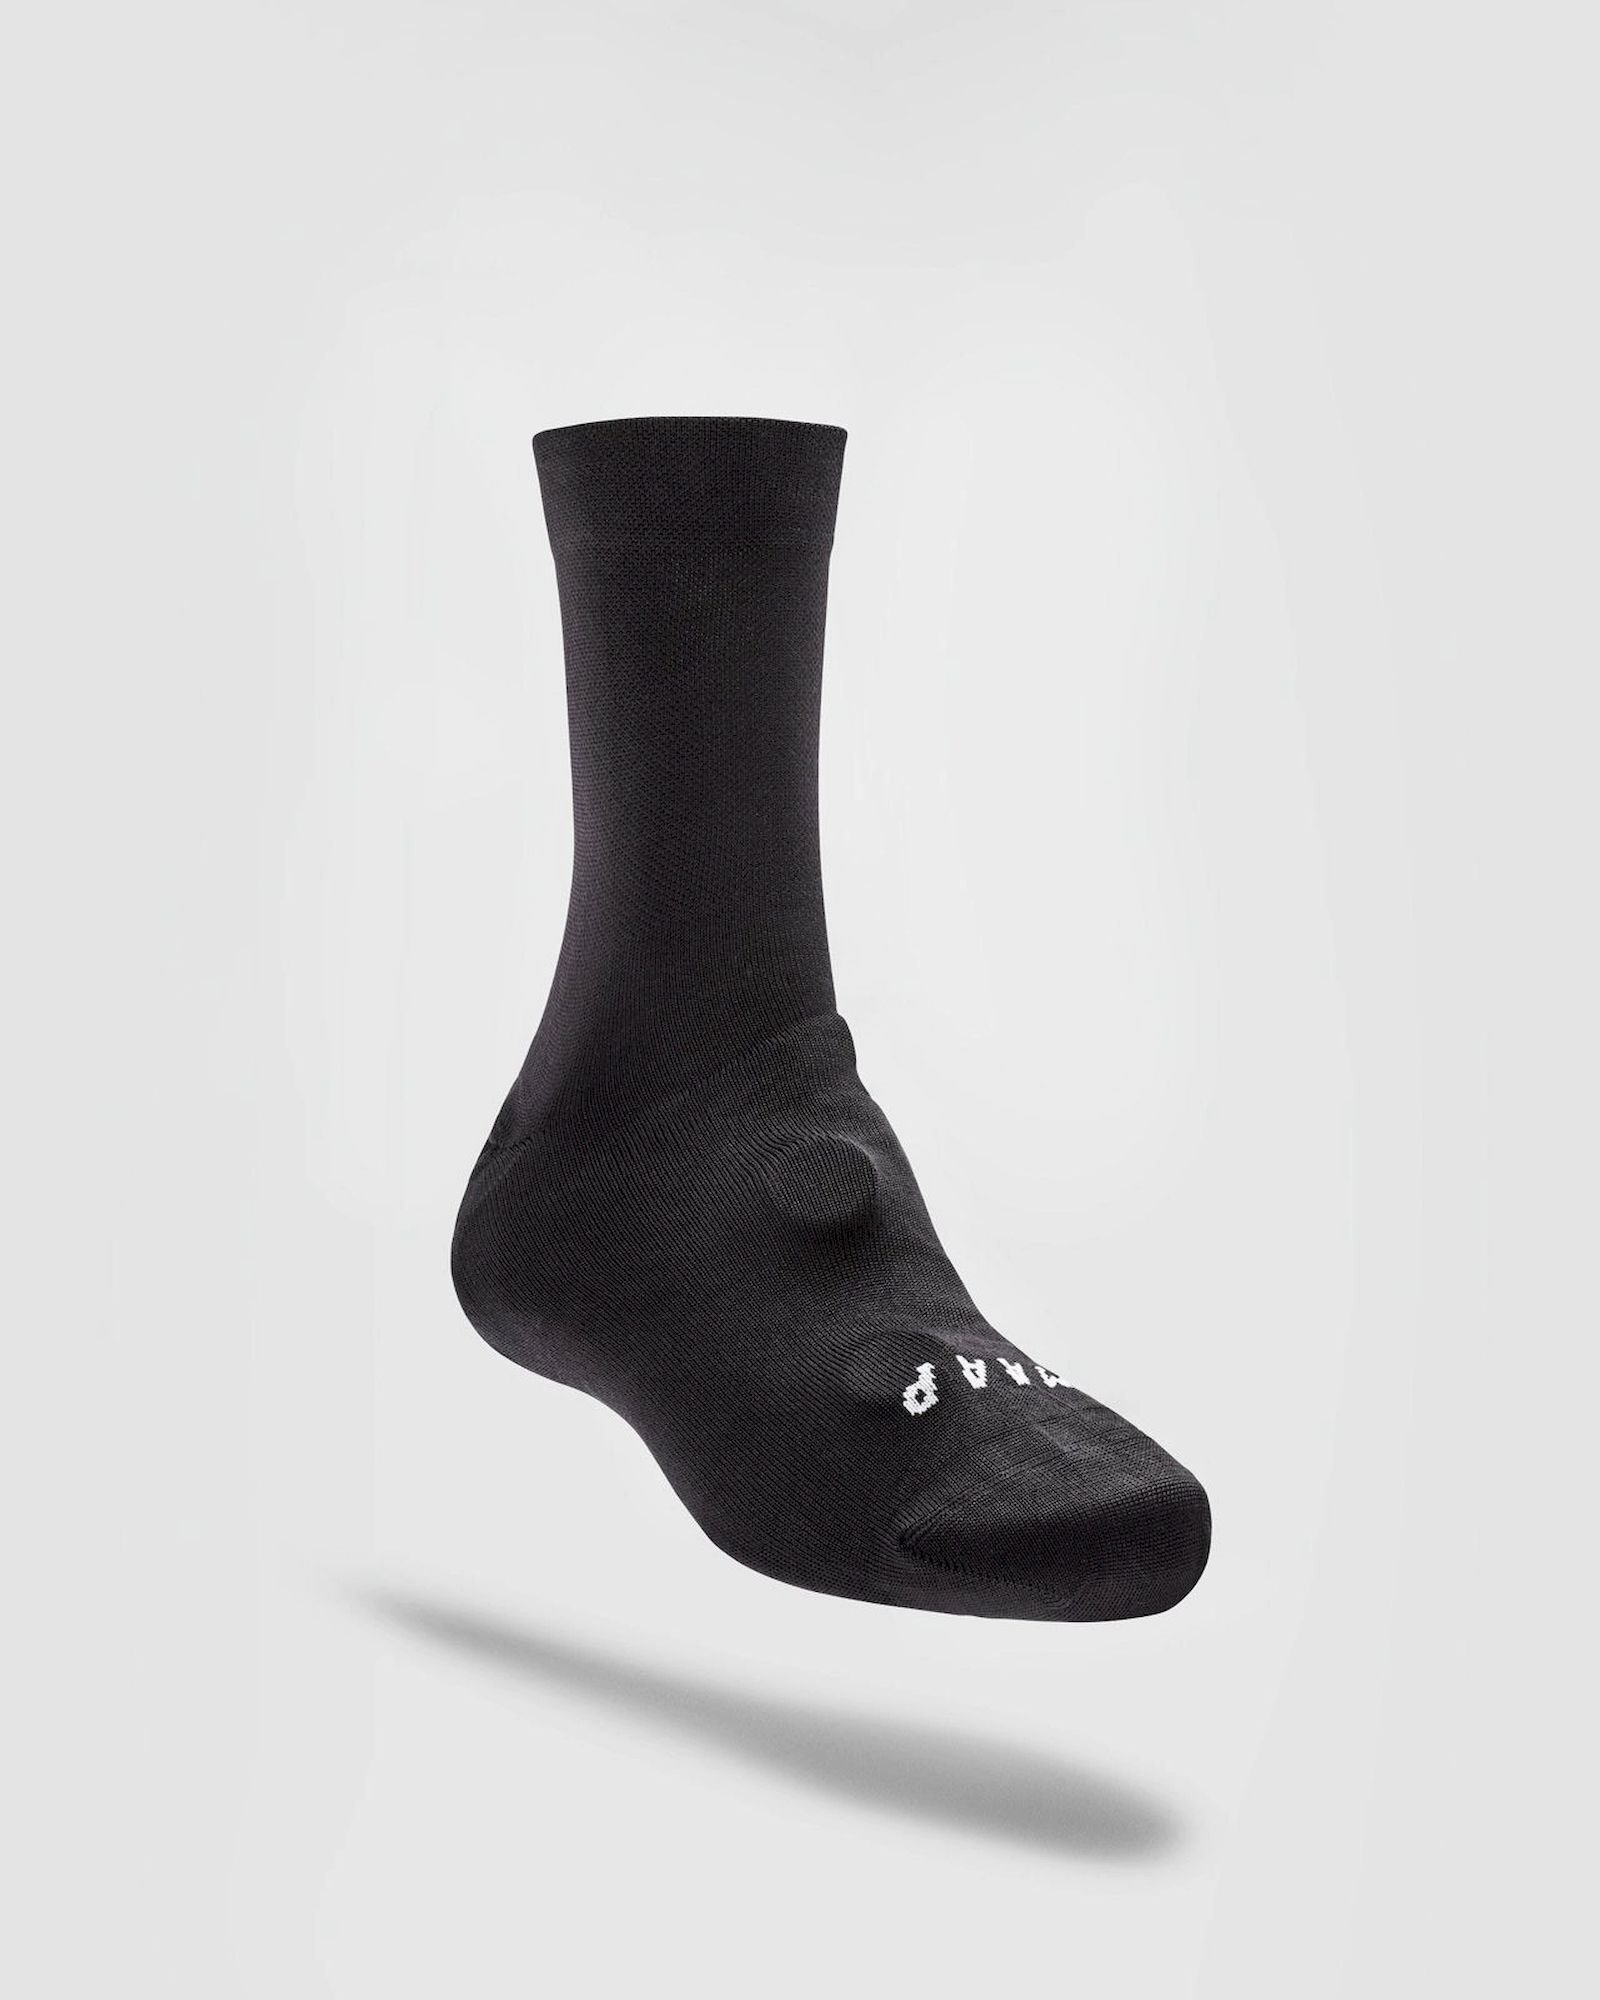 Maap Knitted Oversock - Sur-chaussures vélo | Hardloop